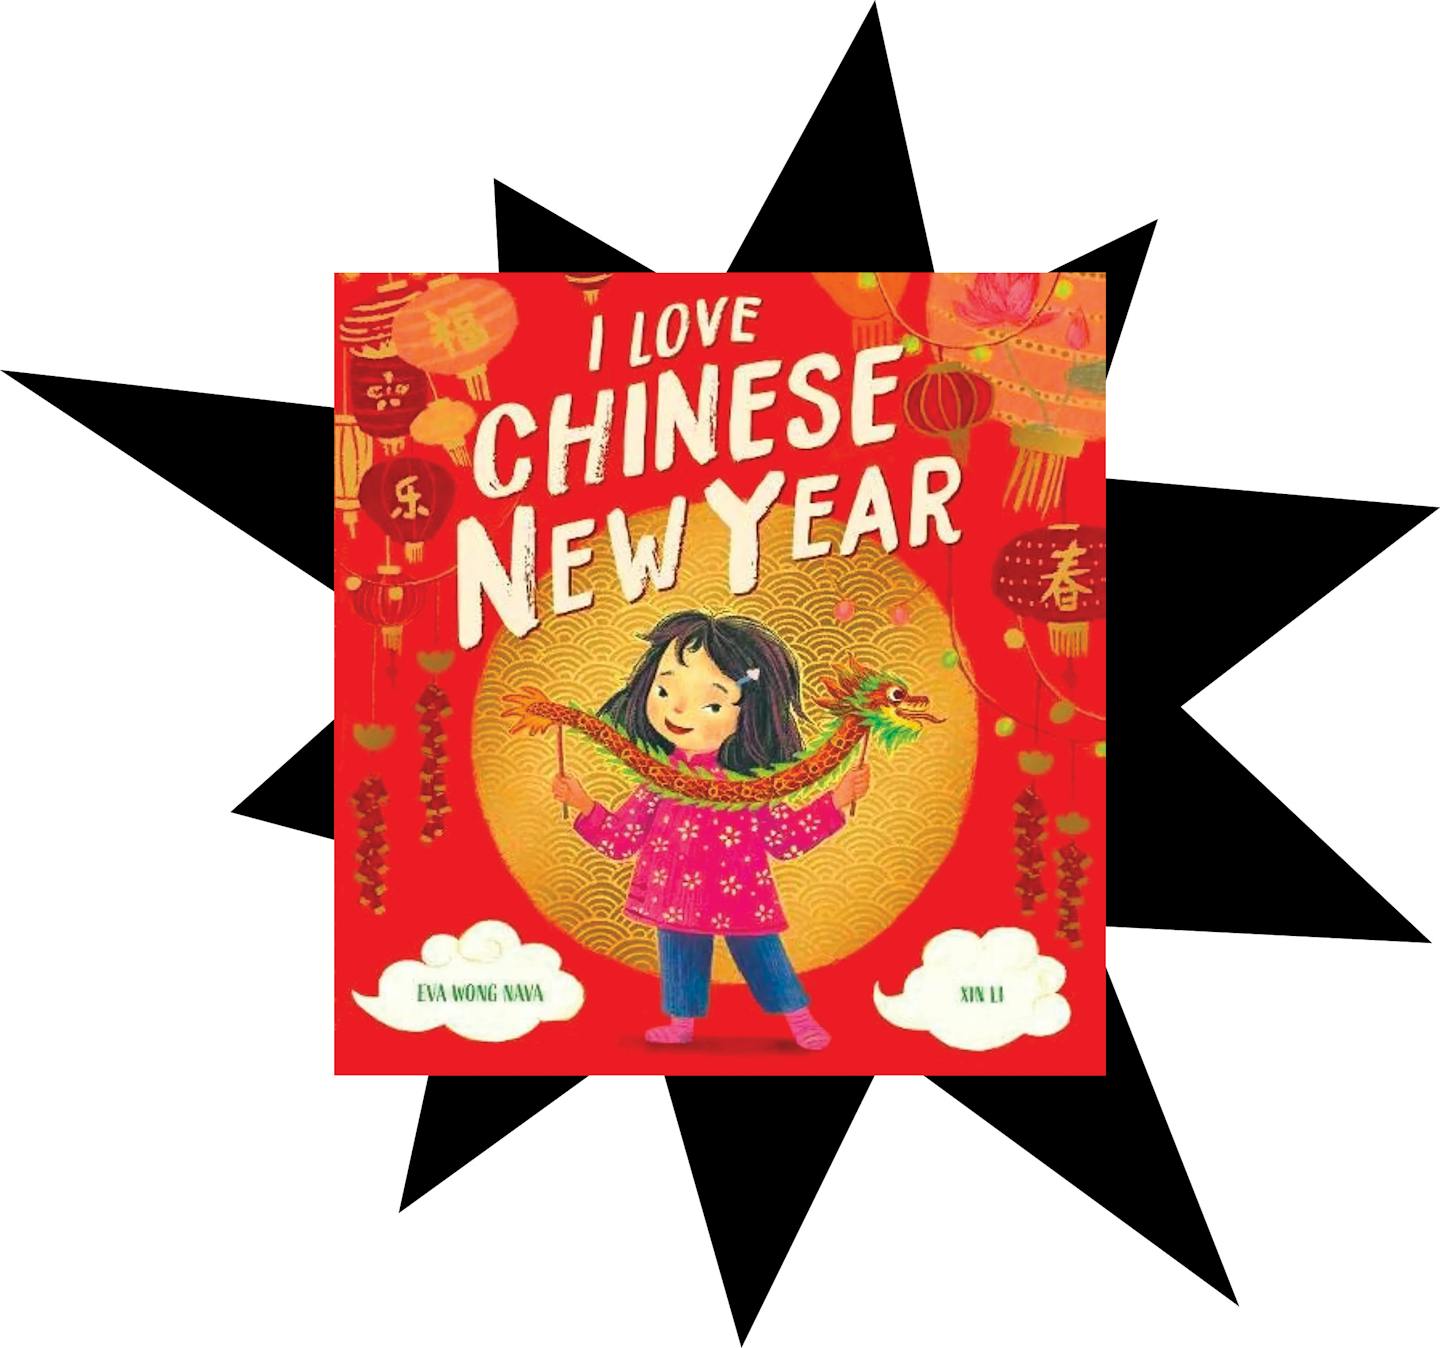 The book jacket of \nI Love Chinese New Year \nis shown superimposed over a graphic of a black comic-style star shape 